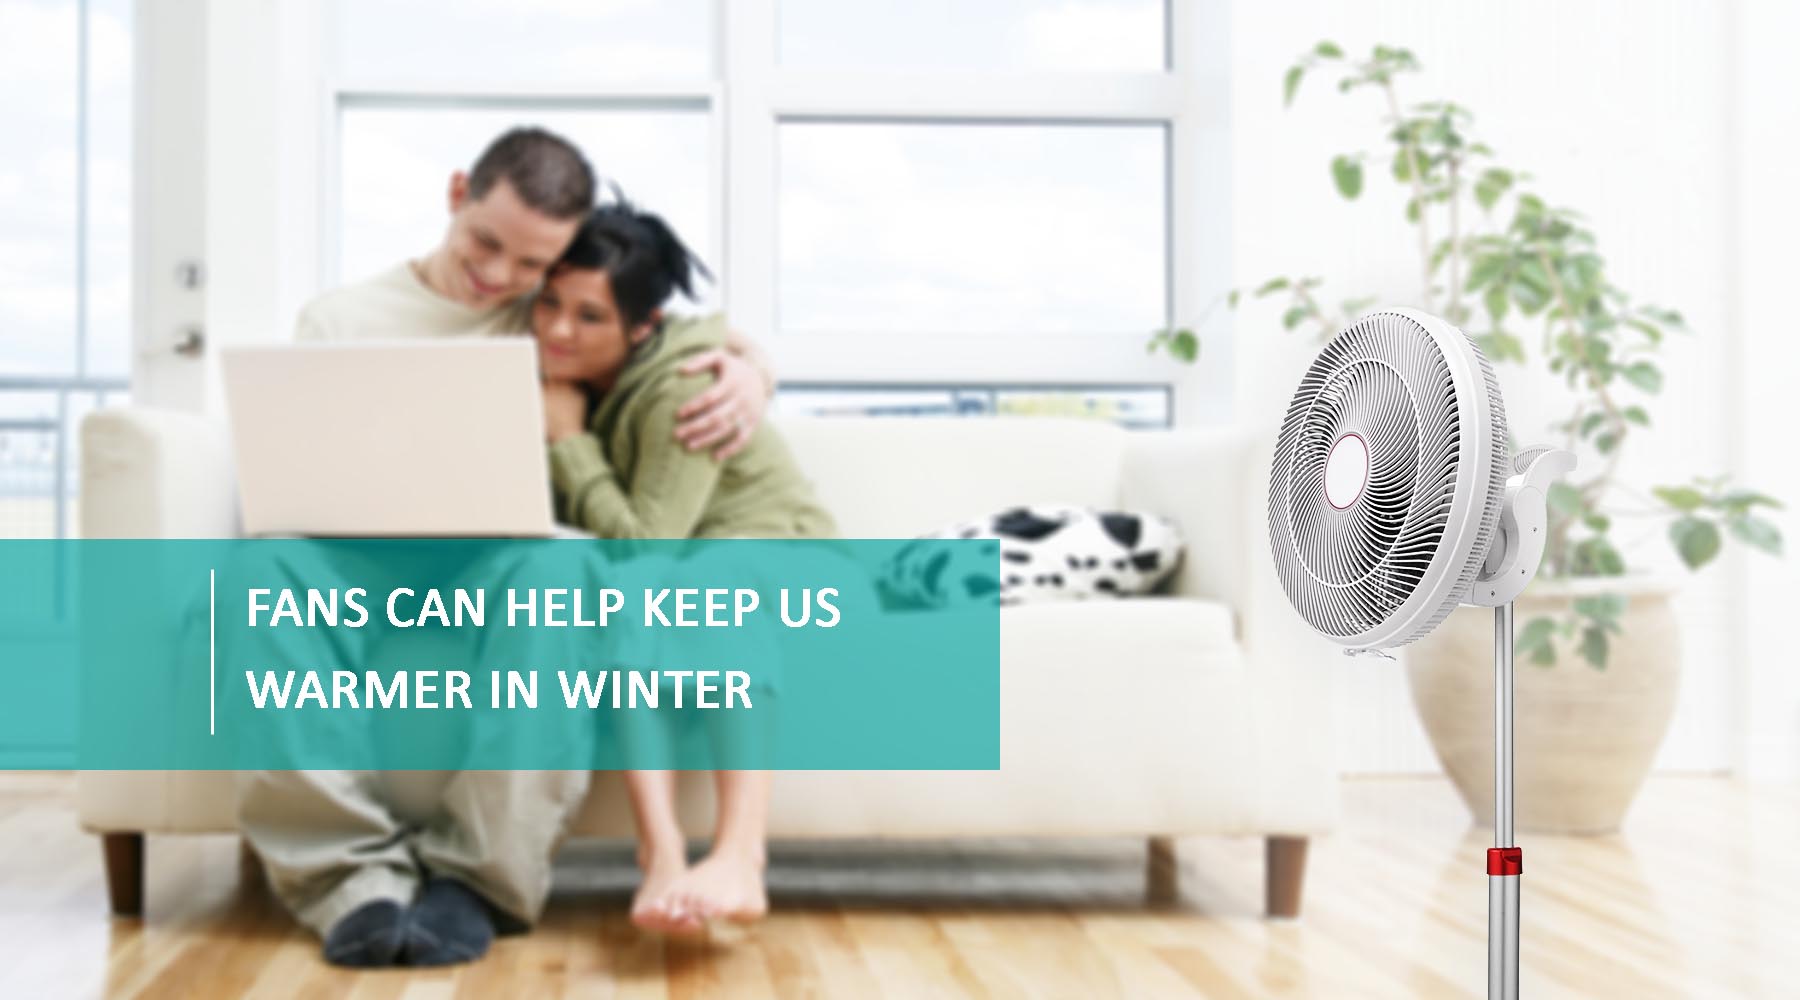 Ideal Home UK - Did you know that fans can help keep us warmer in winter?